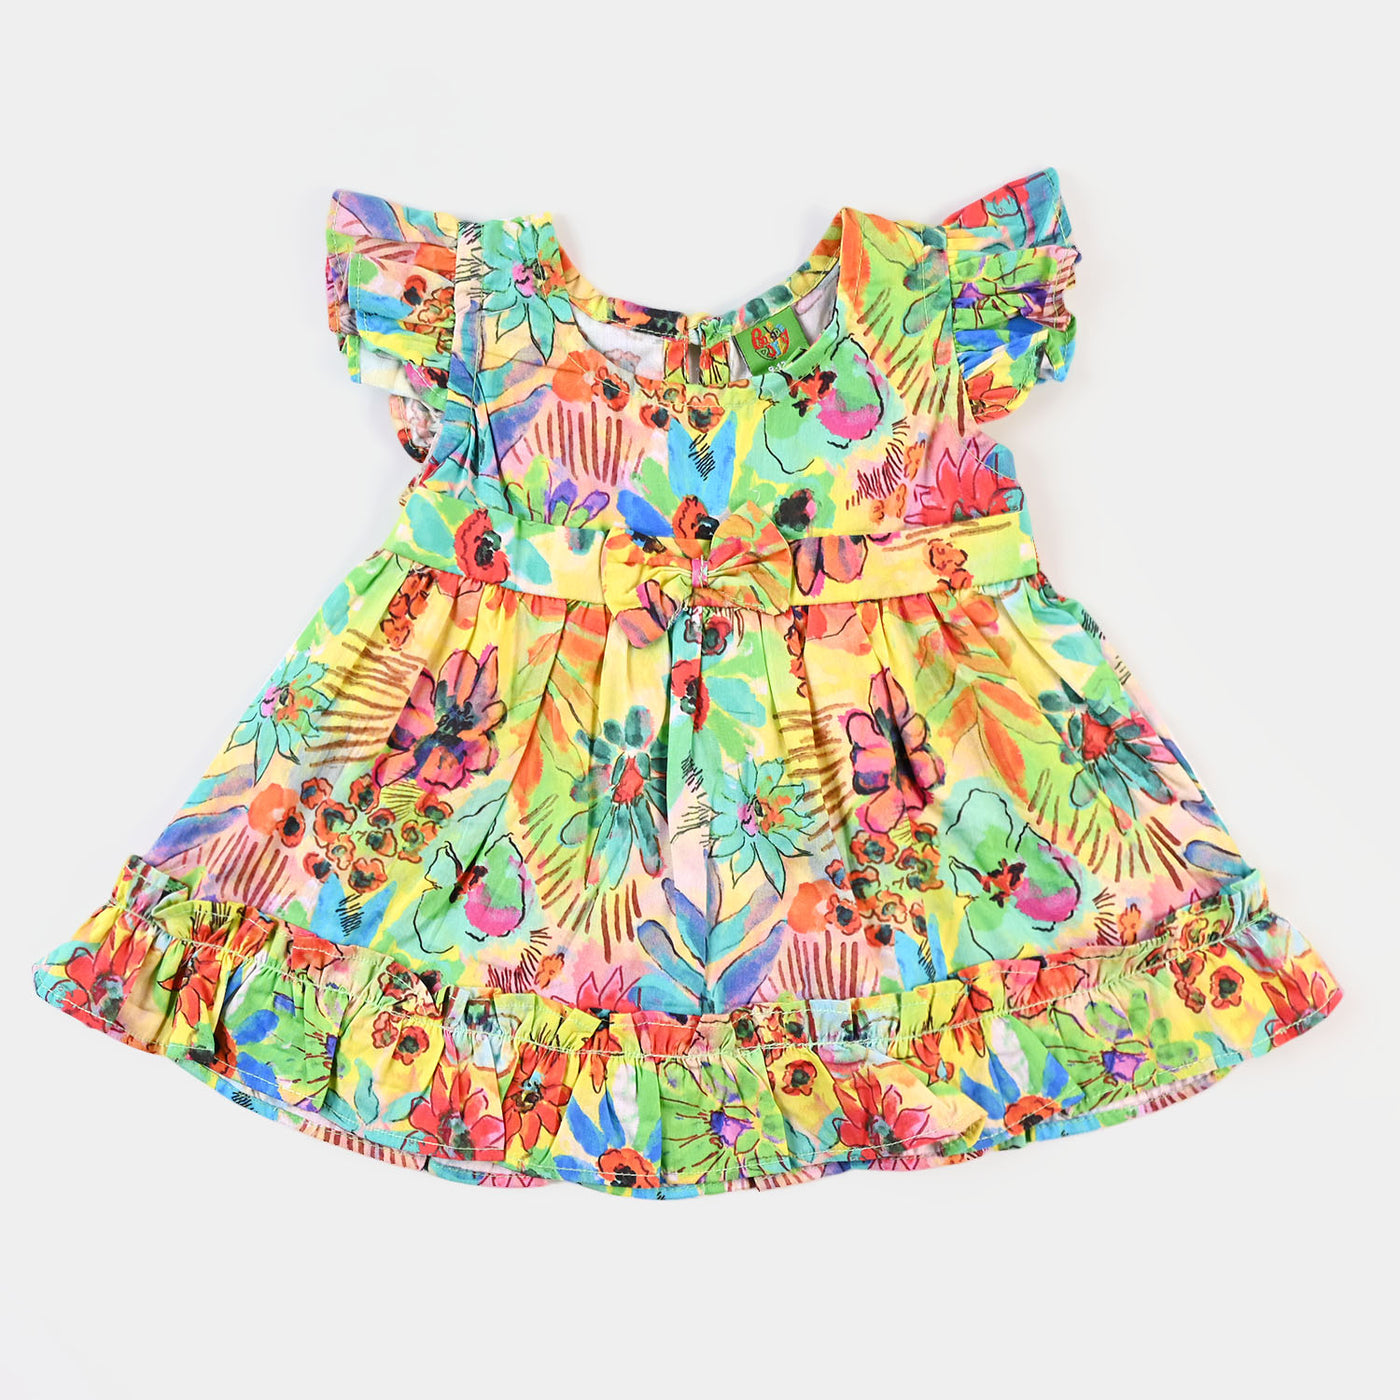 Infant Girls Casual Frock - Multi